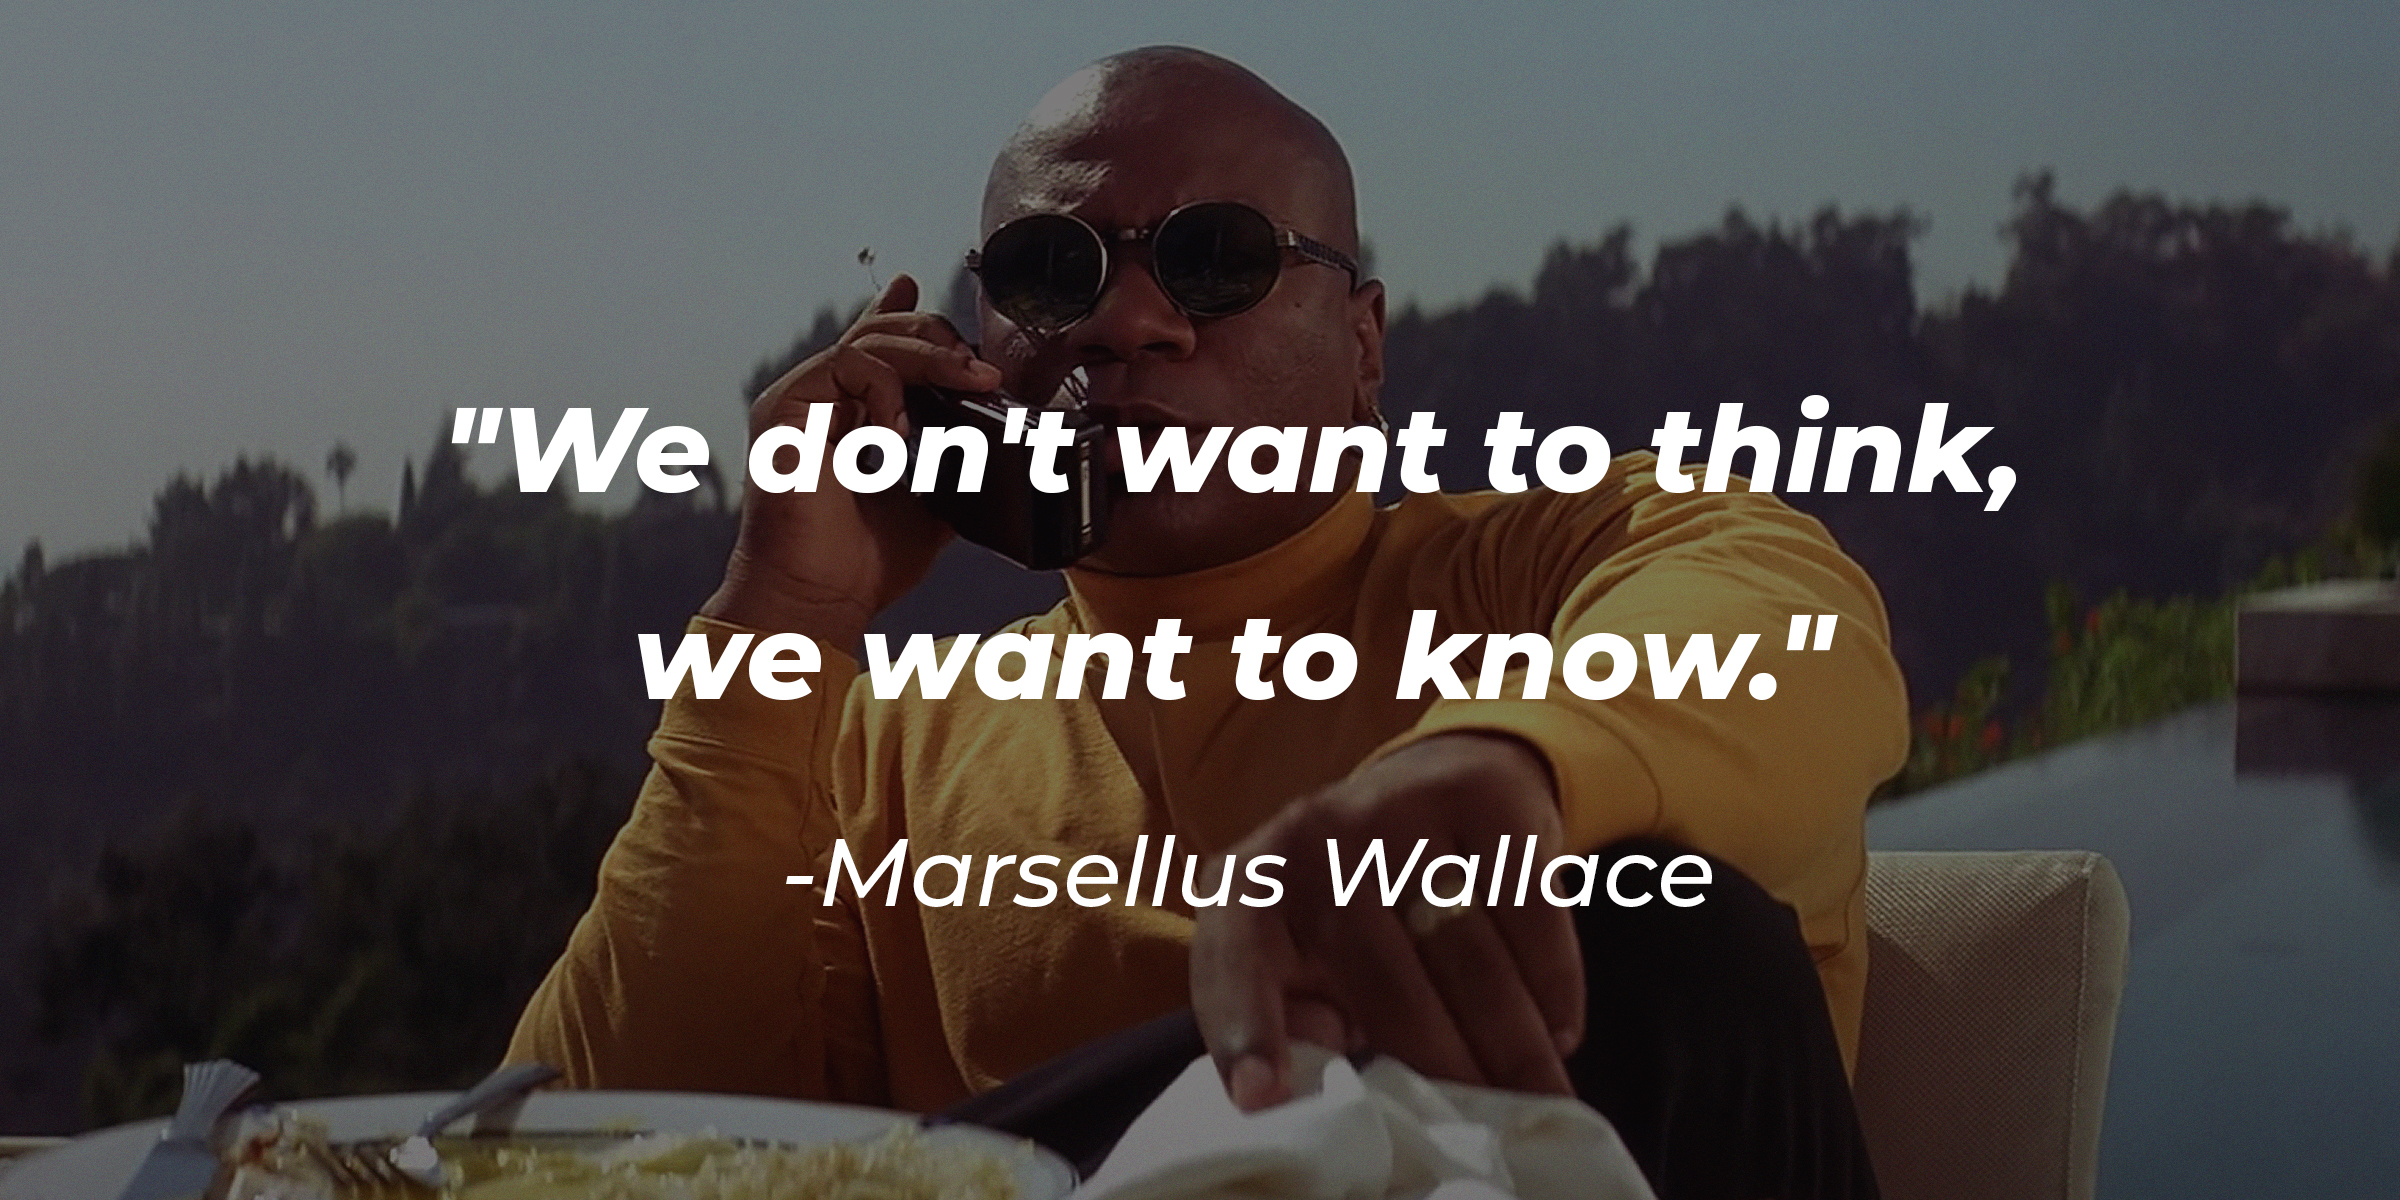 An image of Marsellus Wallace with his quote, "We don't want to think, we want to know." | Source: facebook.com/PulpFiction